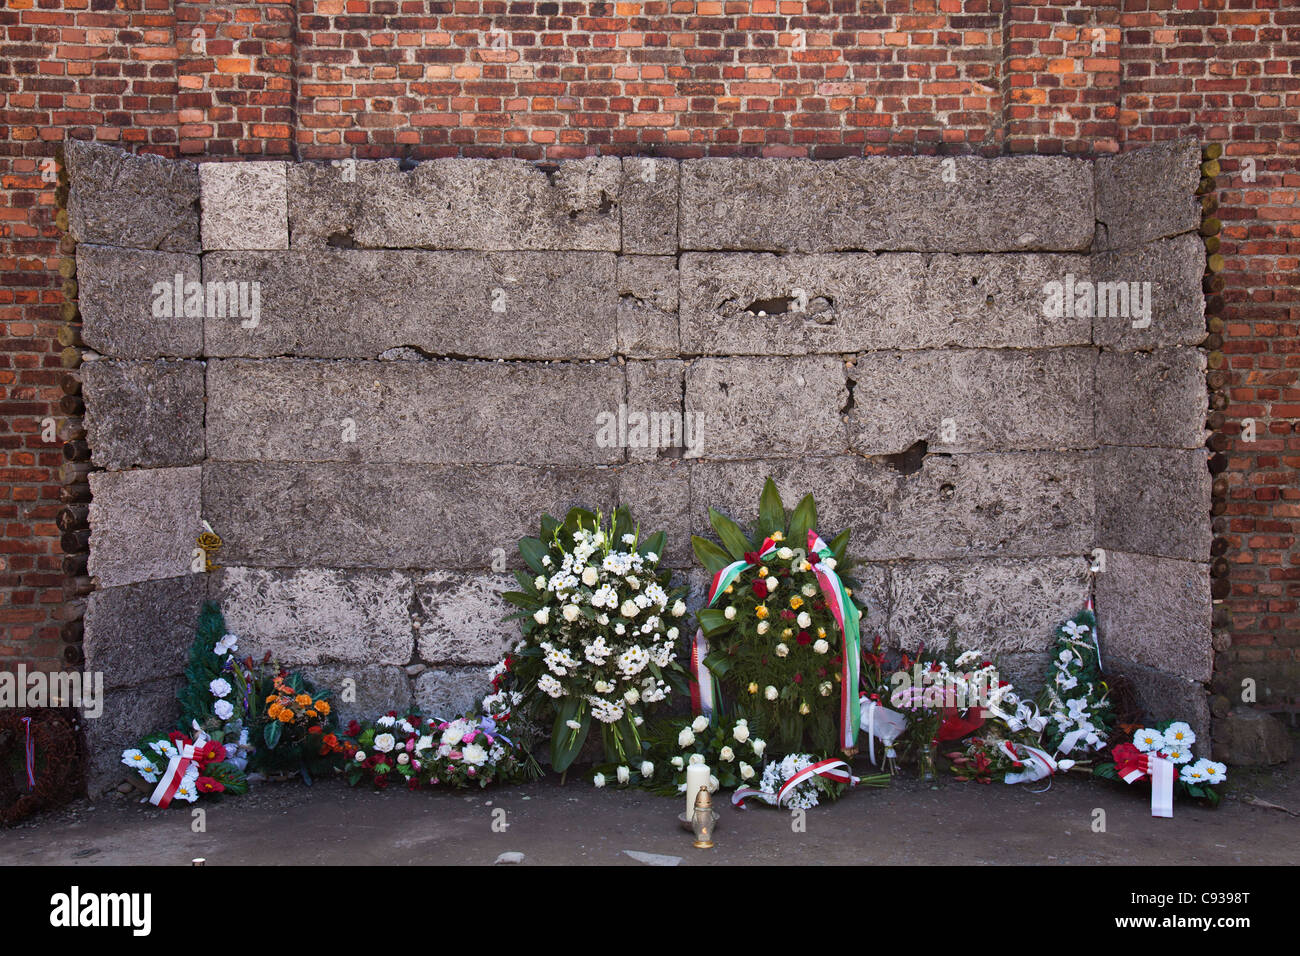 Poland,Oswiecim, Auschwitz I concentration camp. The Death Wall is located in between Blocks 10 and 11. Stock Photo